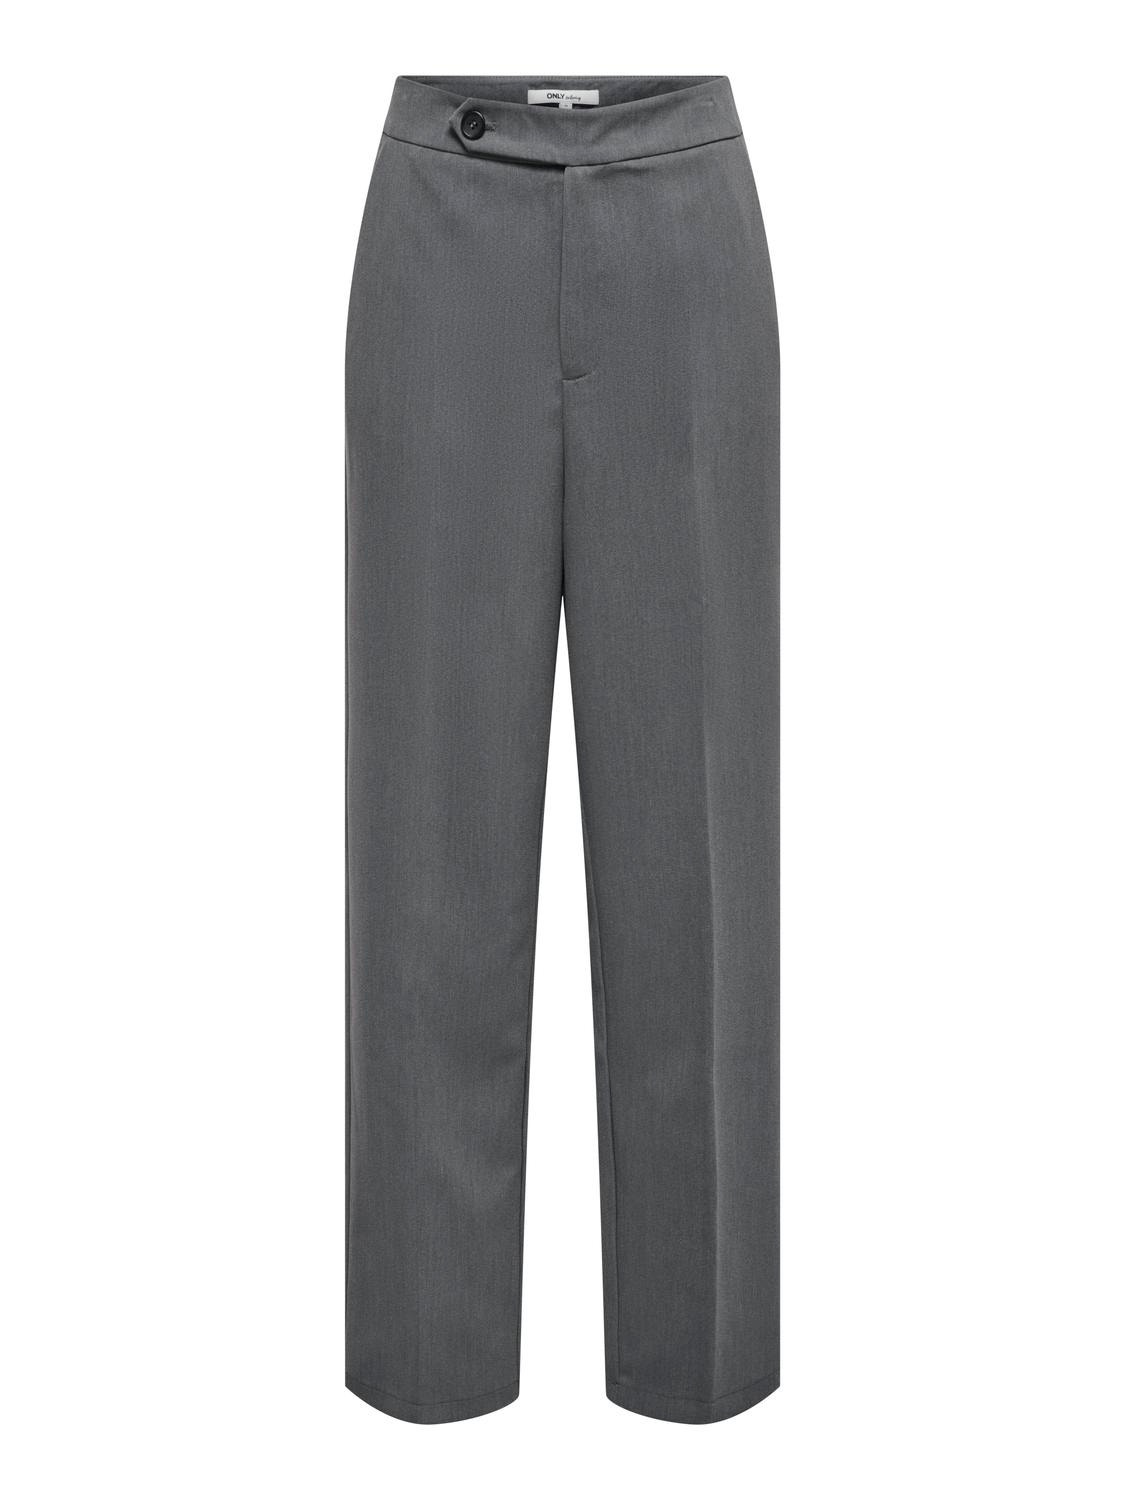 ONLY trousers with high waist -Medium Grey Melange - 15303161